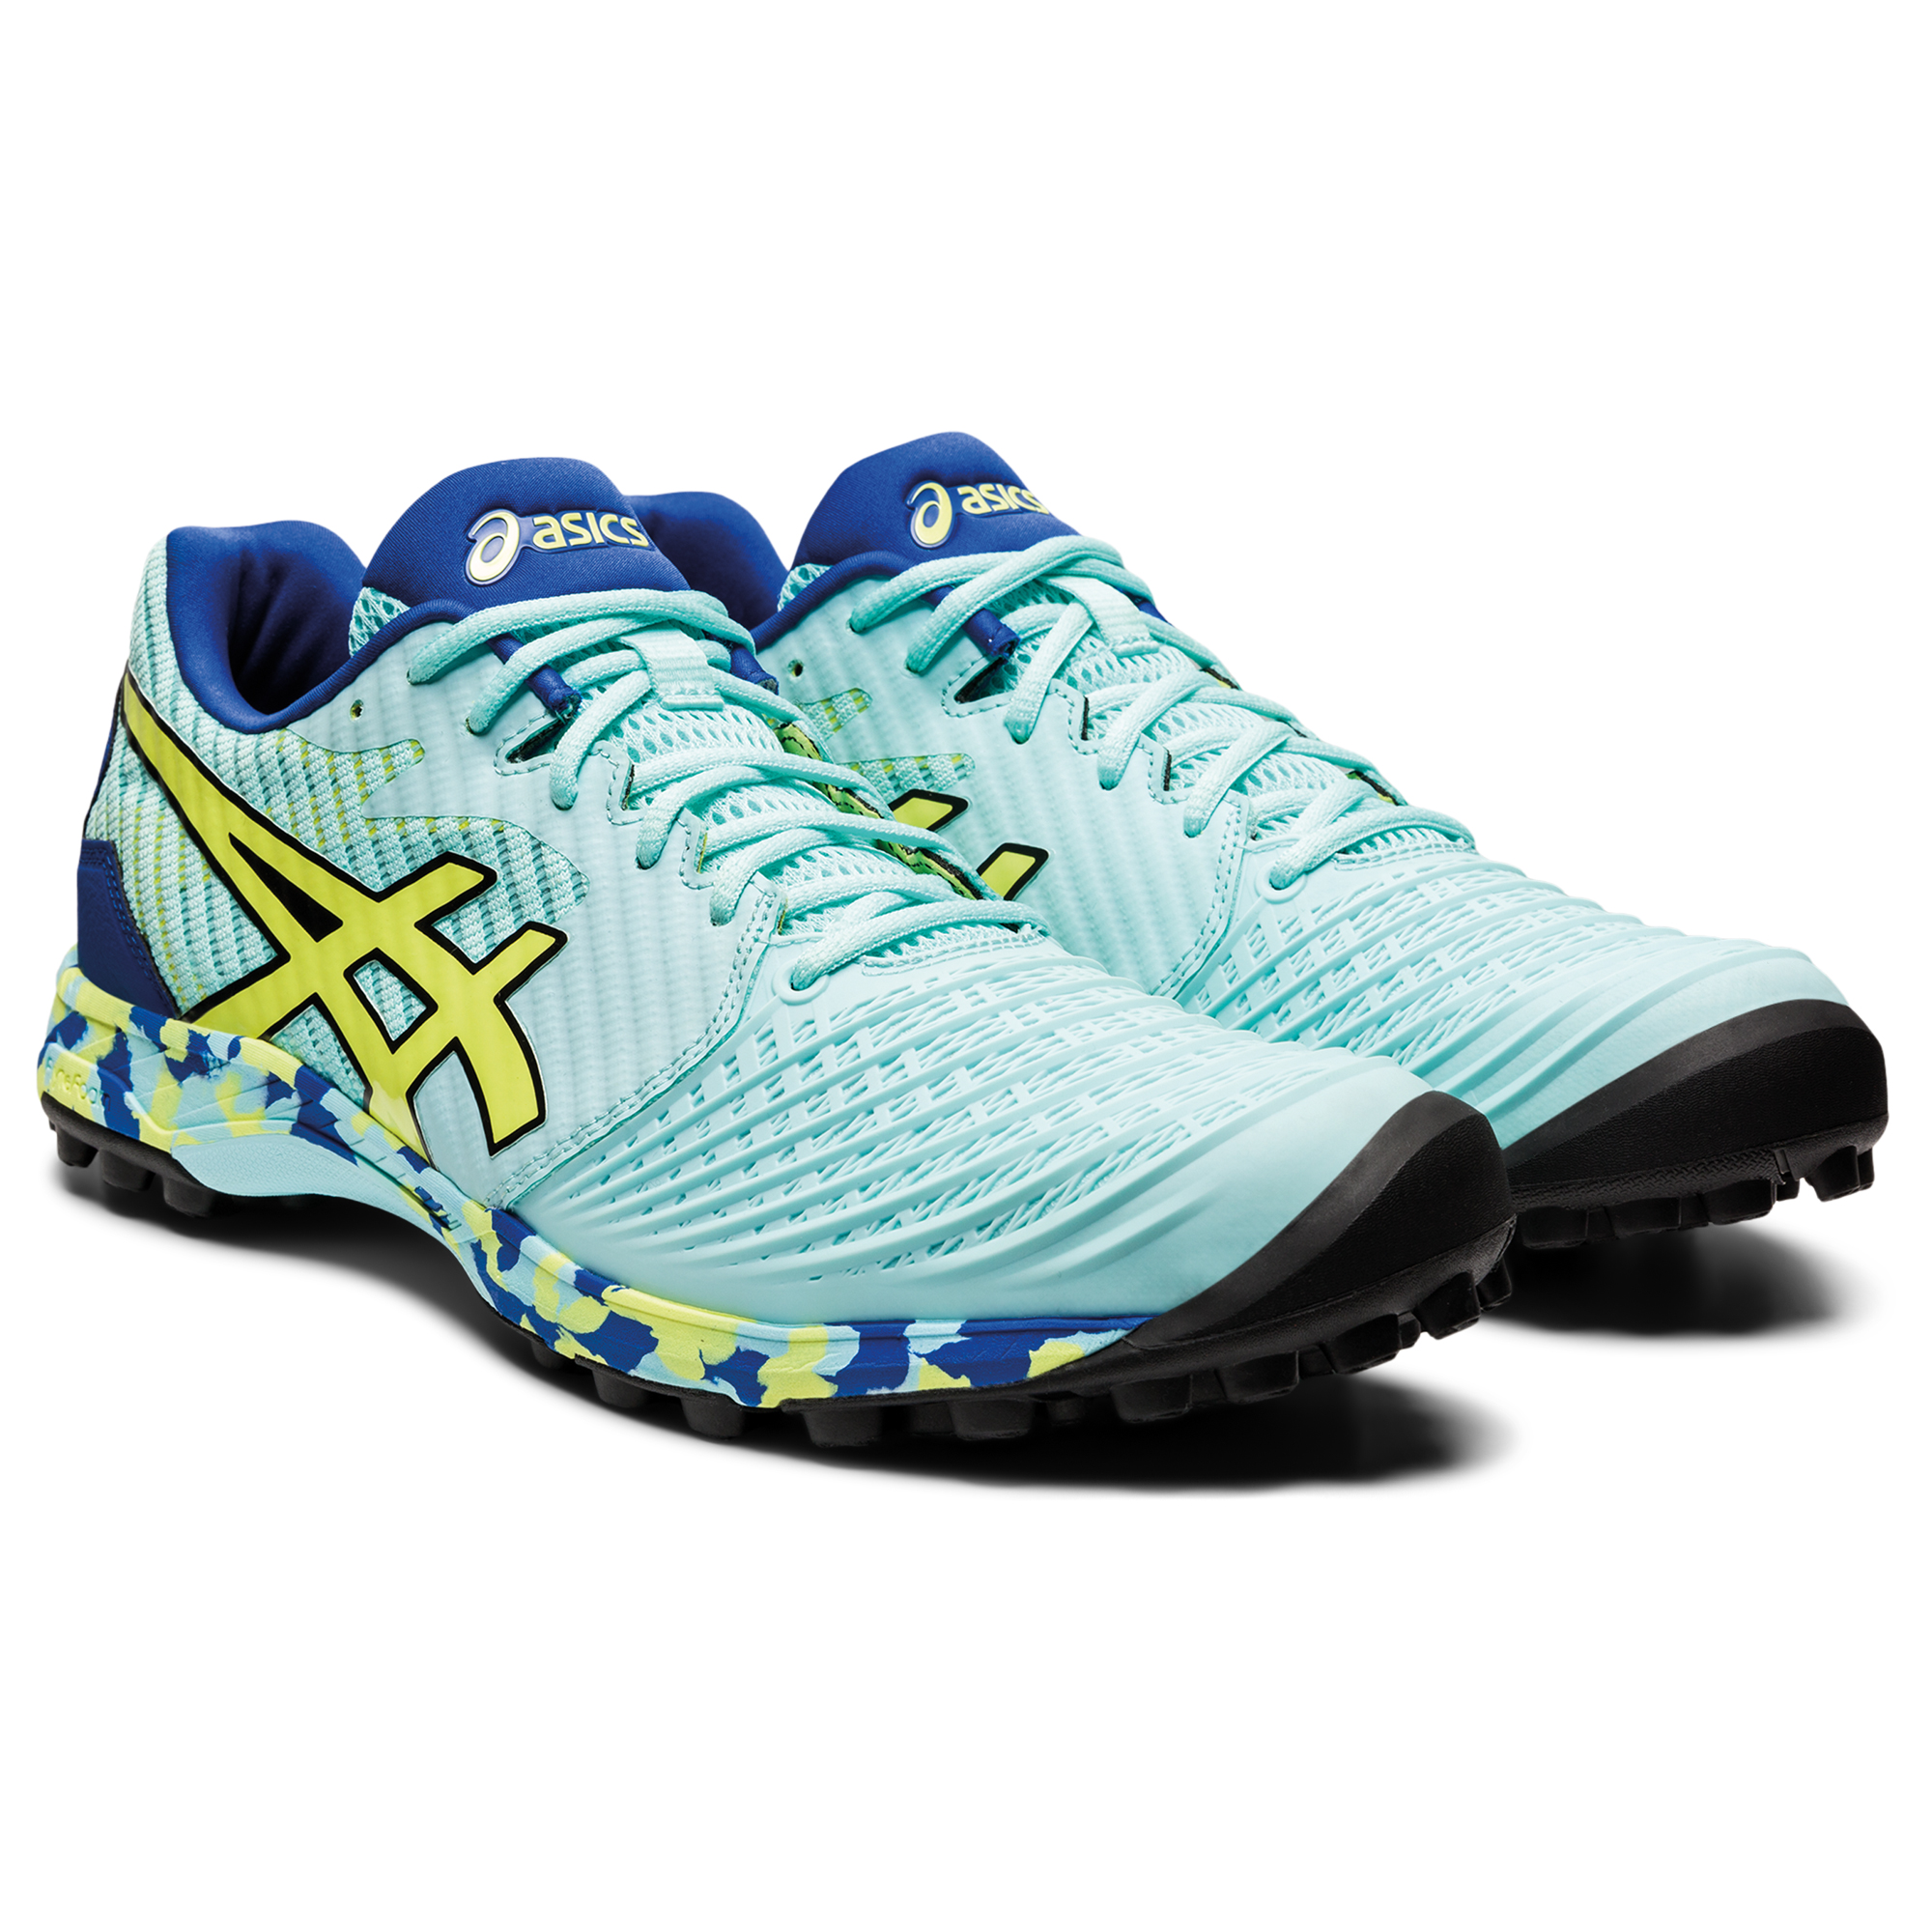 Chaussure d'hockey Asics Field Ultimate FF Limited Edition Femme